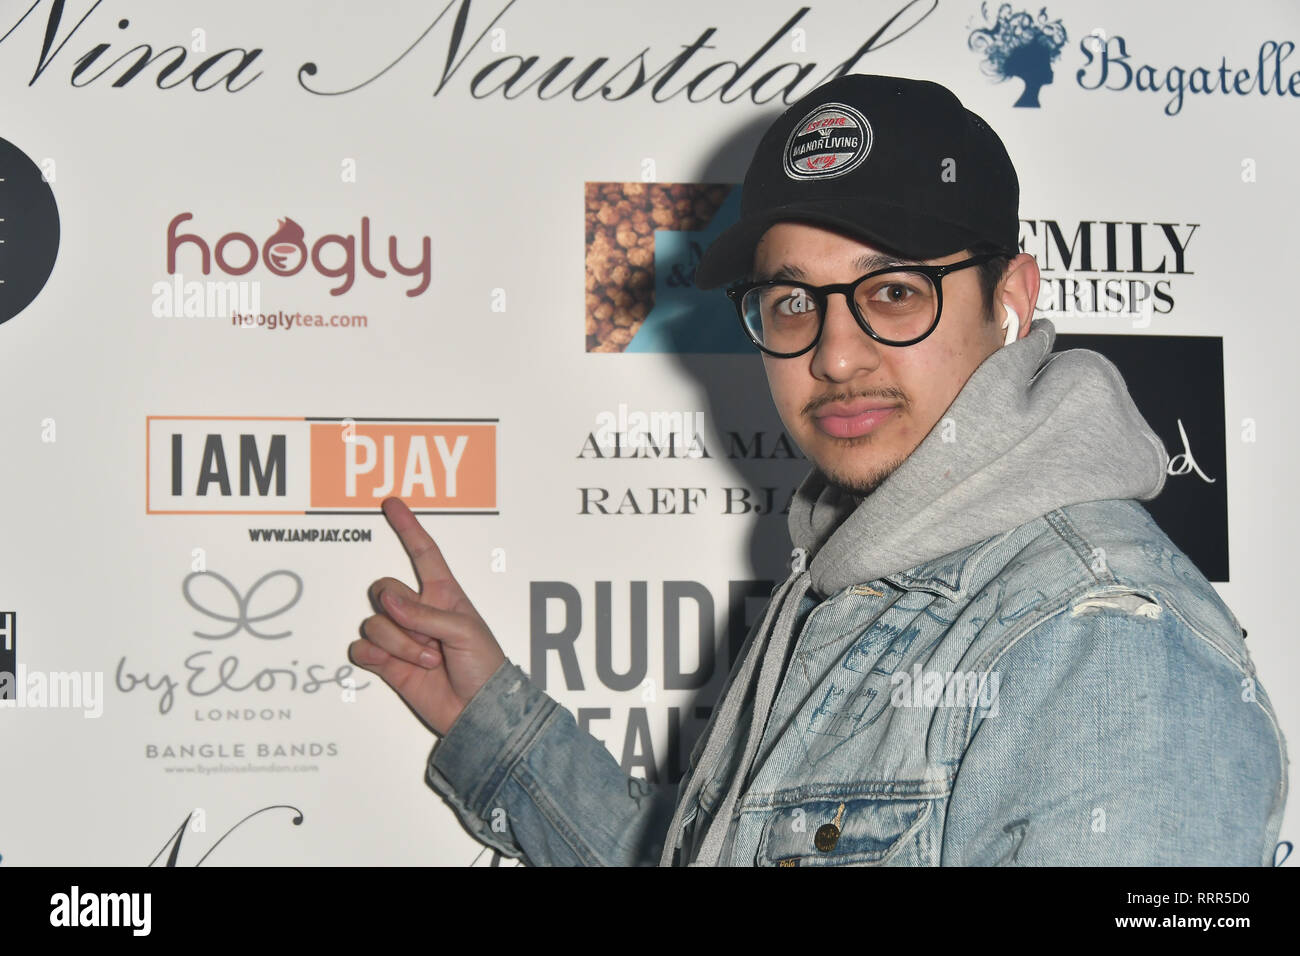 London, UK. 26th Feb 2019. Iam Pjay Dj at Nina Naustdal catwalk show SS19/20 collection by The London School of Beauty & Make-up at Bagatelle on 26 Feb 2019, London, UK. Credit: Picture Capital/Alamy Live News Stock Photo